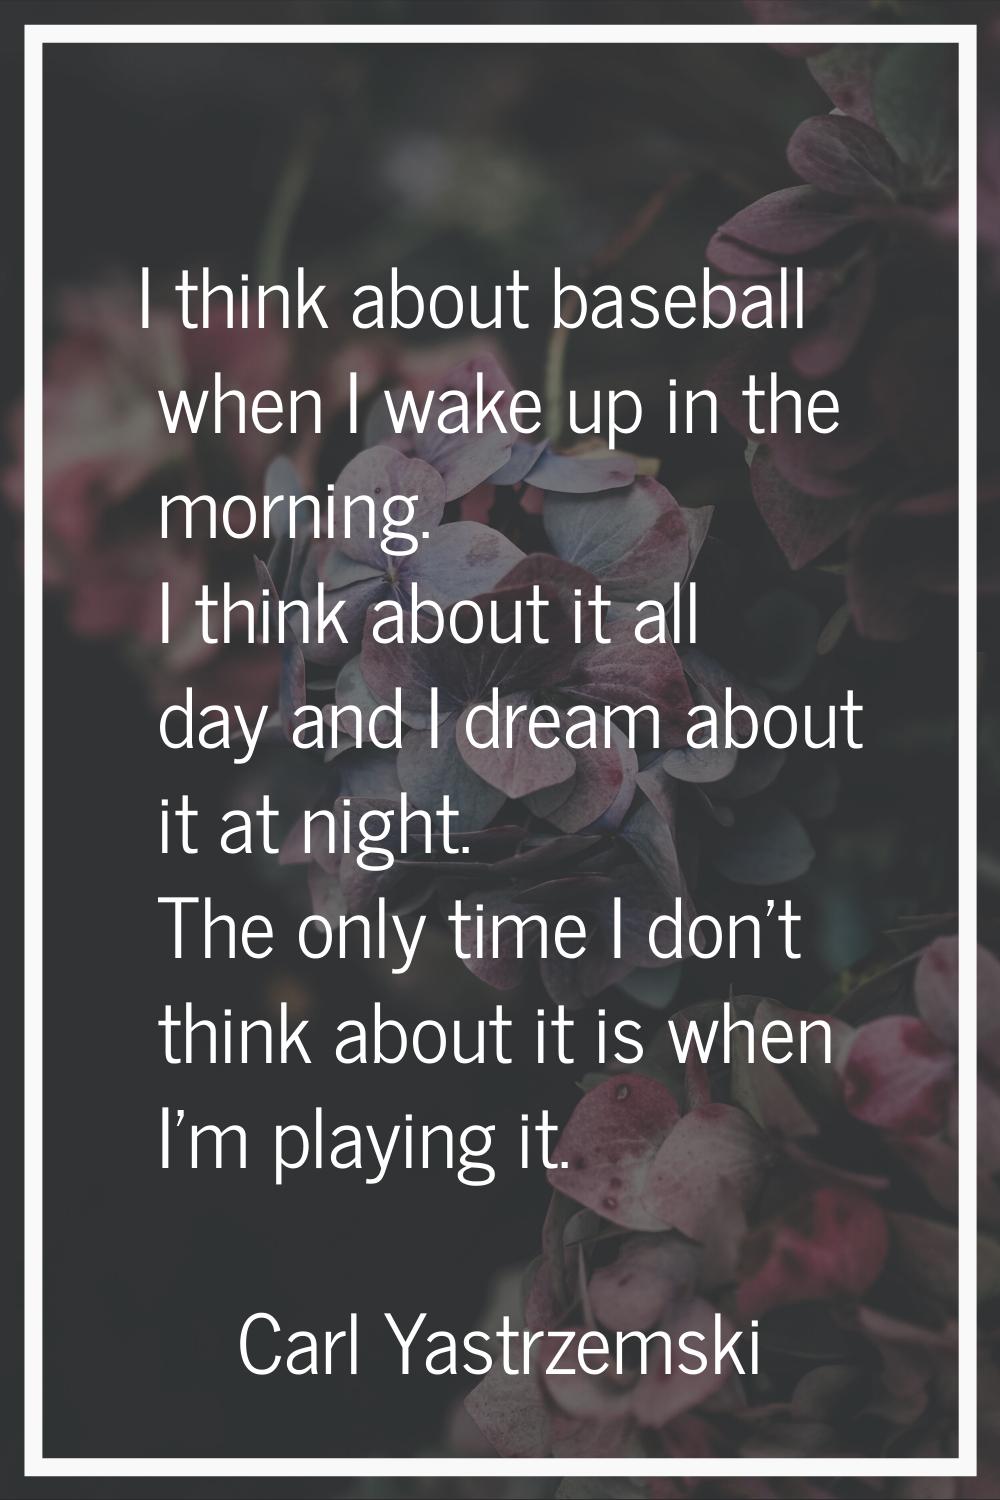 I think about baseball when I wake up in the morning. I think about it all day and I dream about it